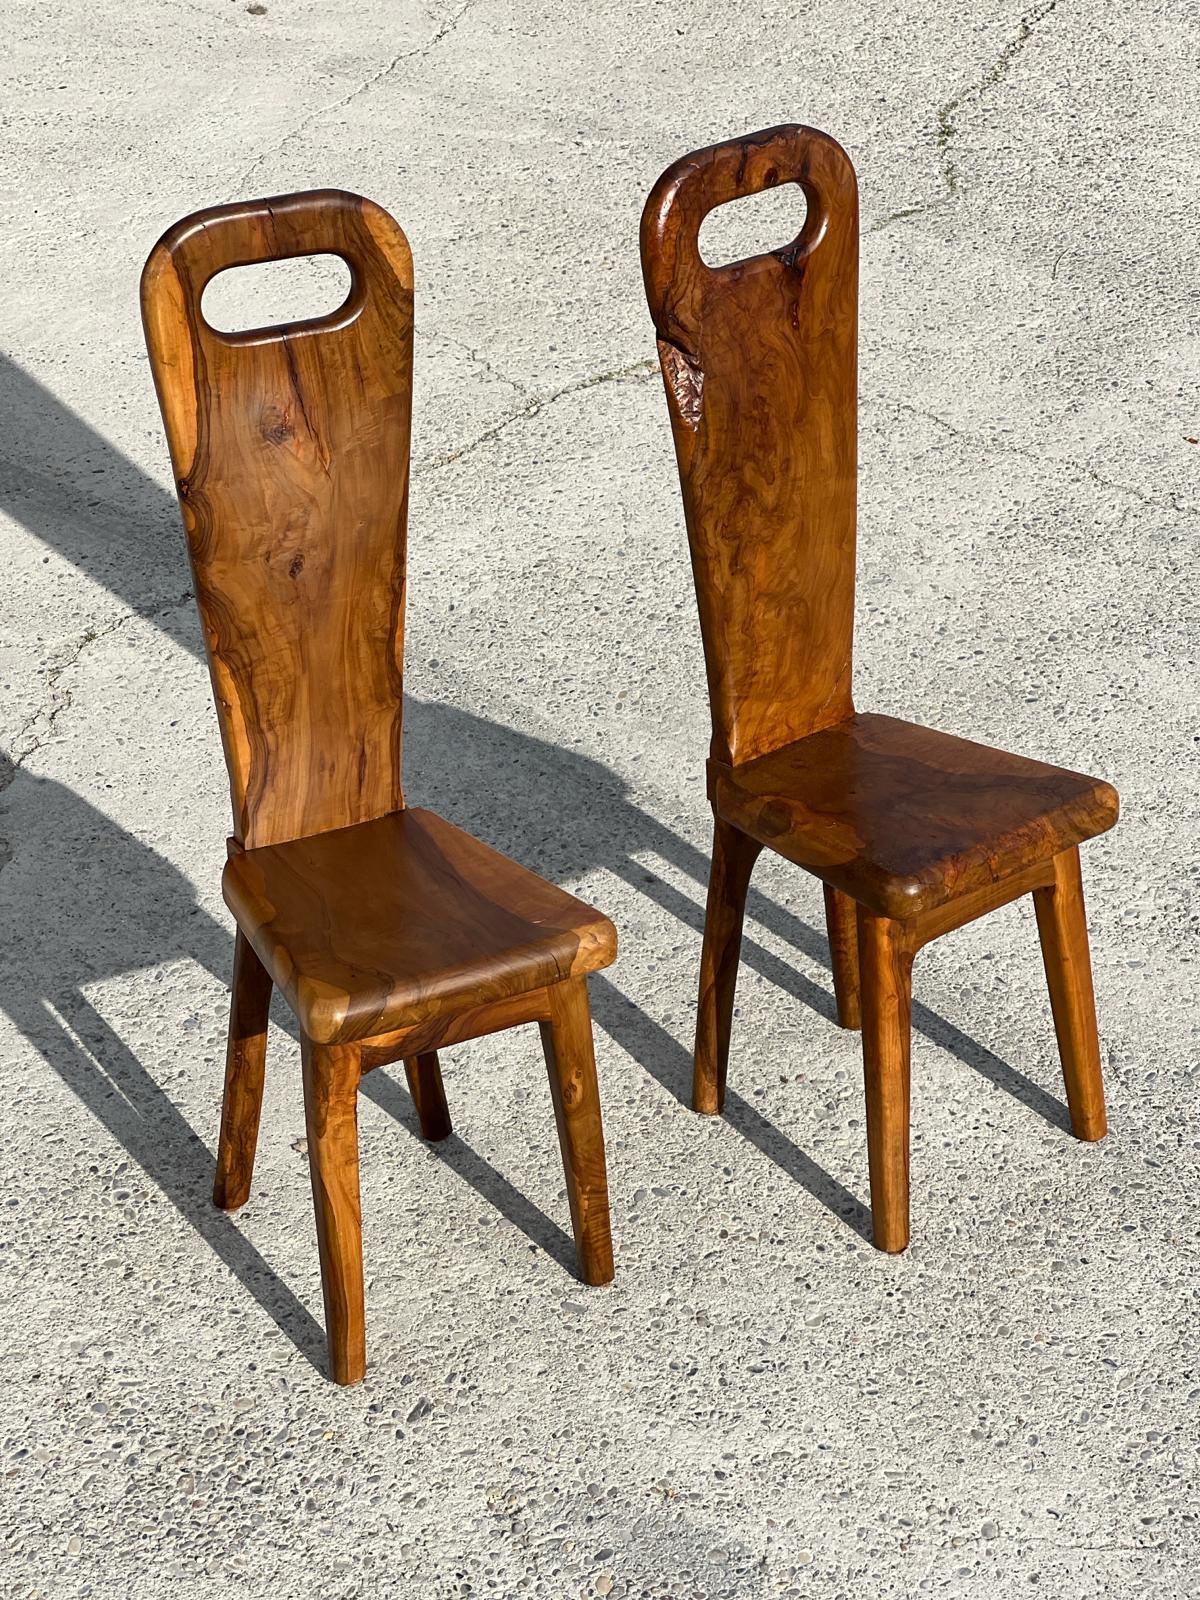 20th Century Sculptural dining set in solid olive wood, French work by Maison Skela 1960